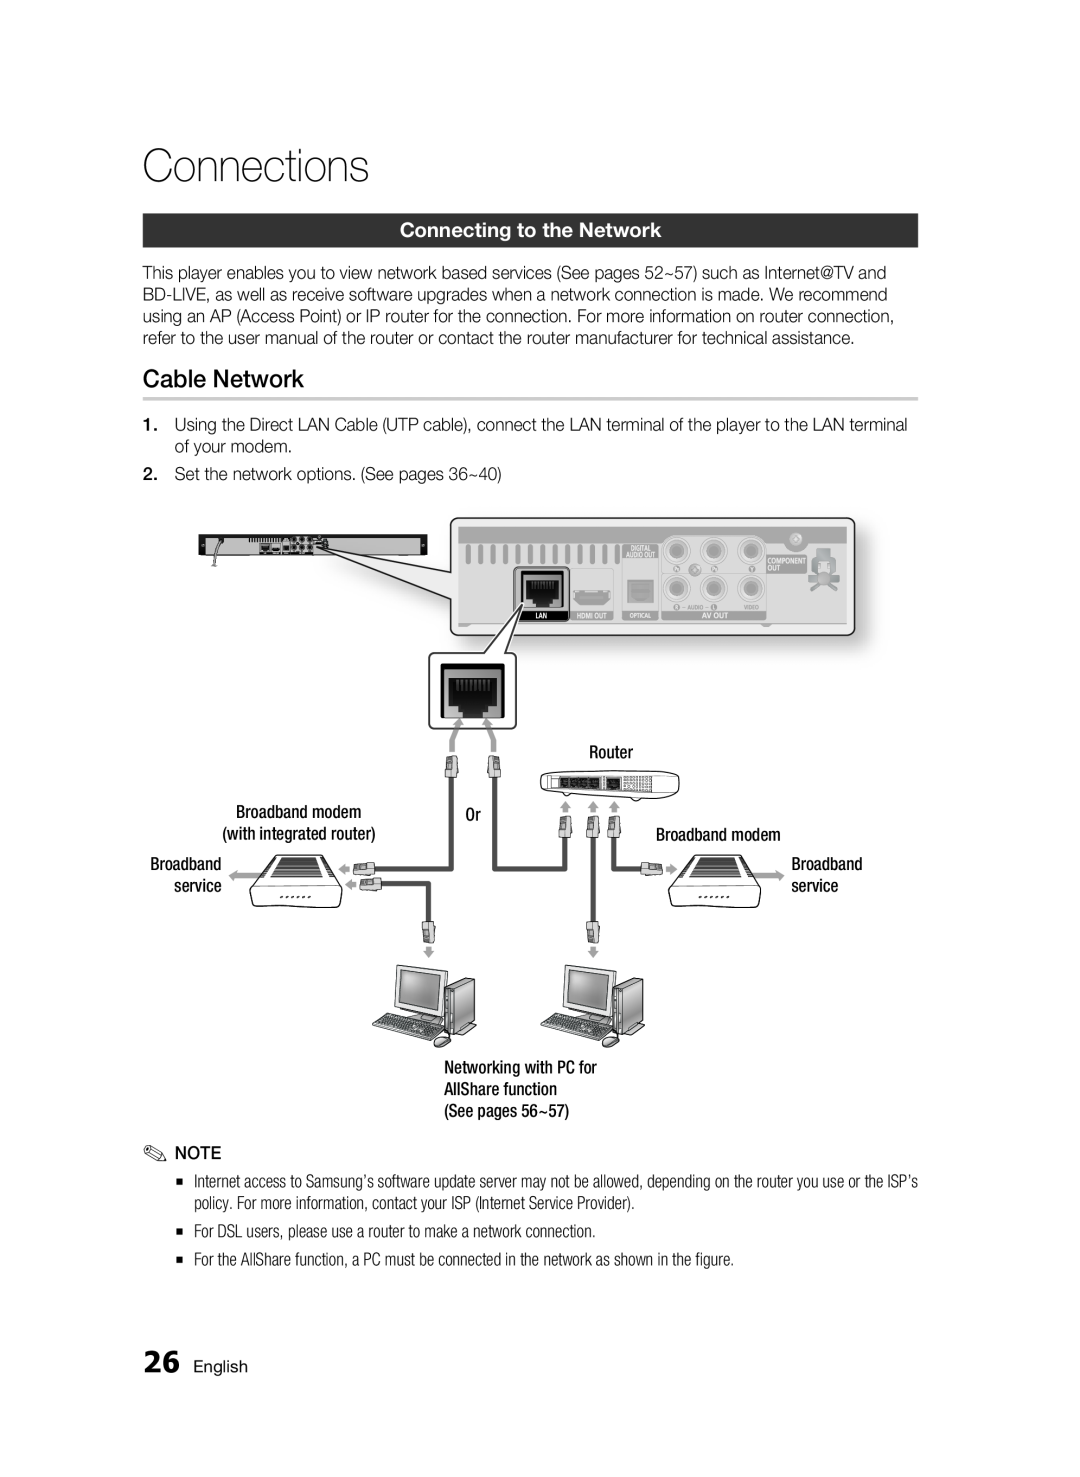 Samsung 01942G-BD-C6300-XAC-0823 user manual Cable Network, Connecting to the Network, Connections 